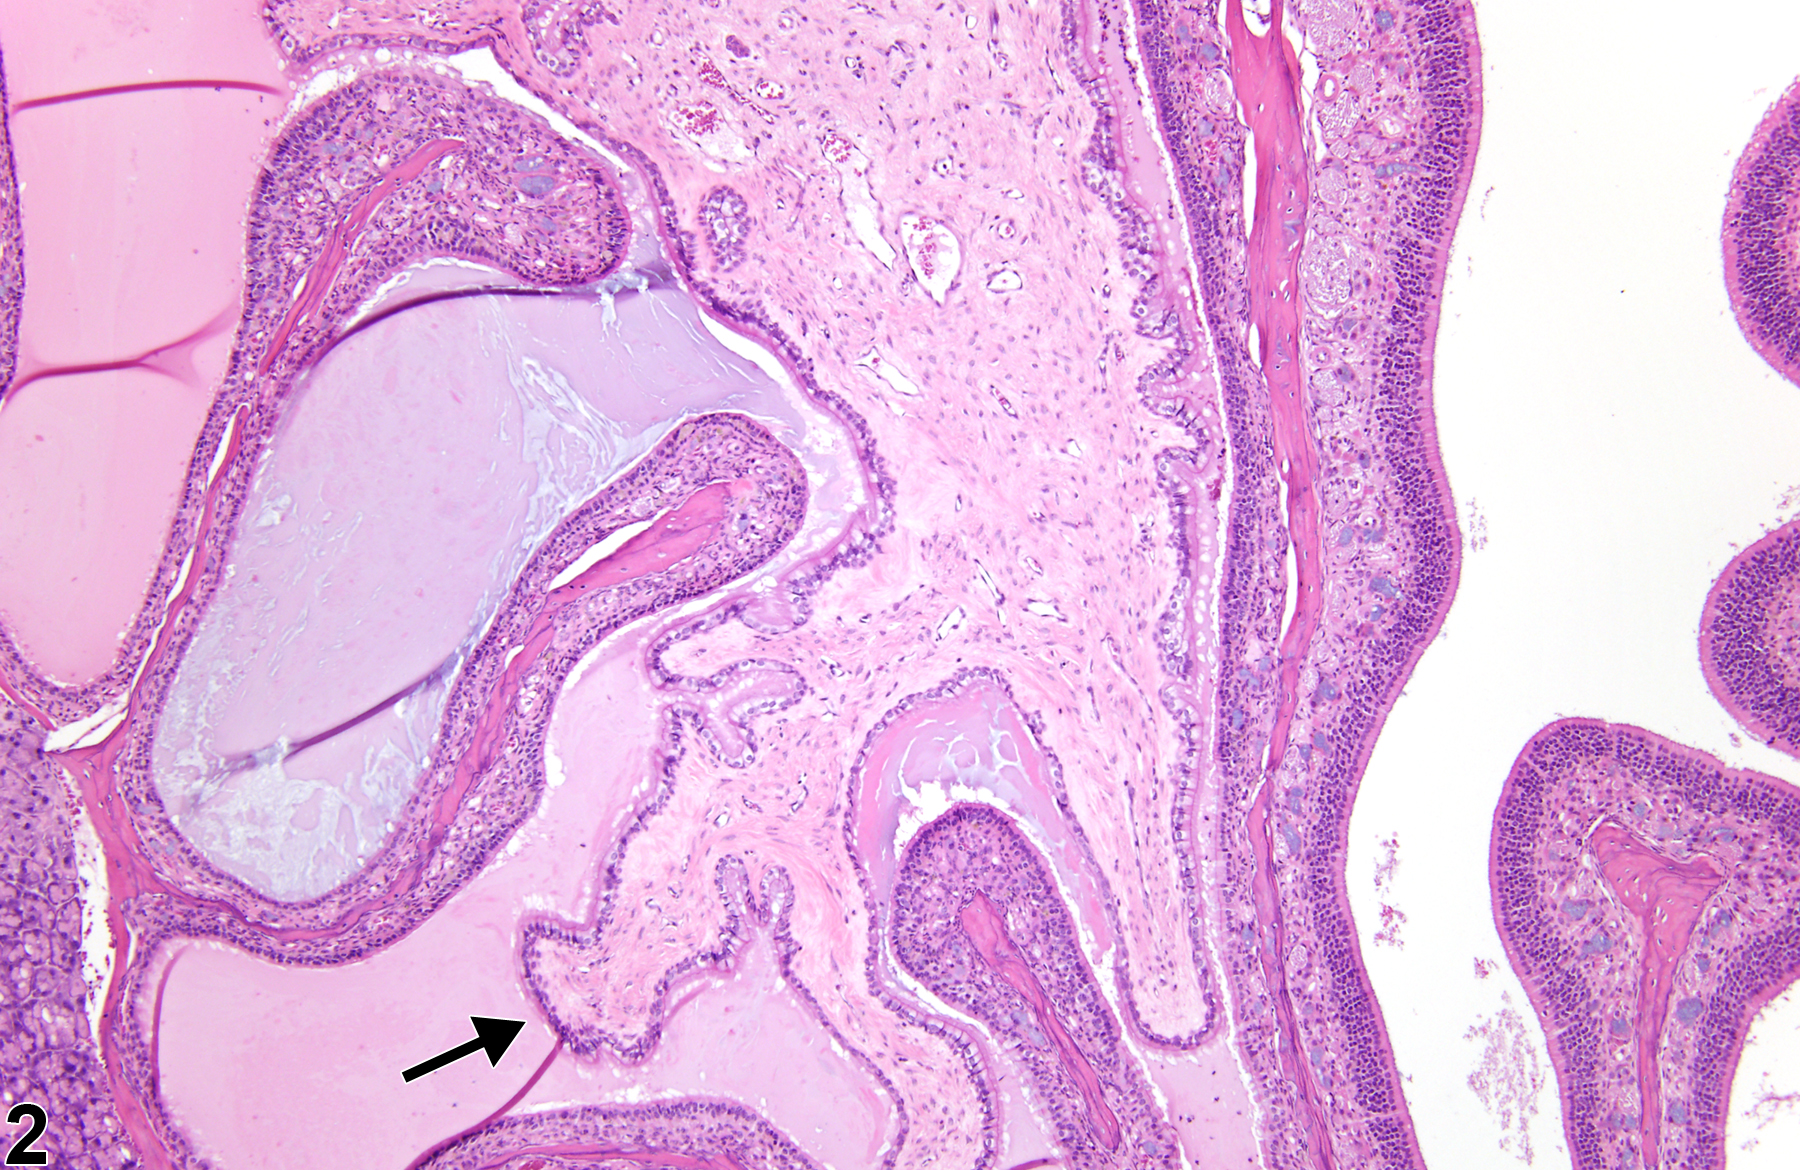 Image of polyp, inflammatory in the nose from a male B6C3F1/N mouse in a chronic study